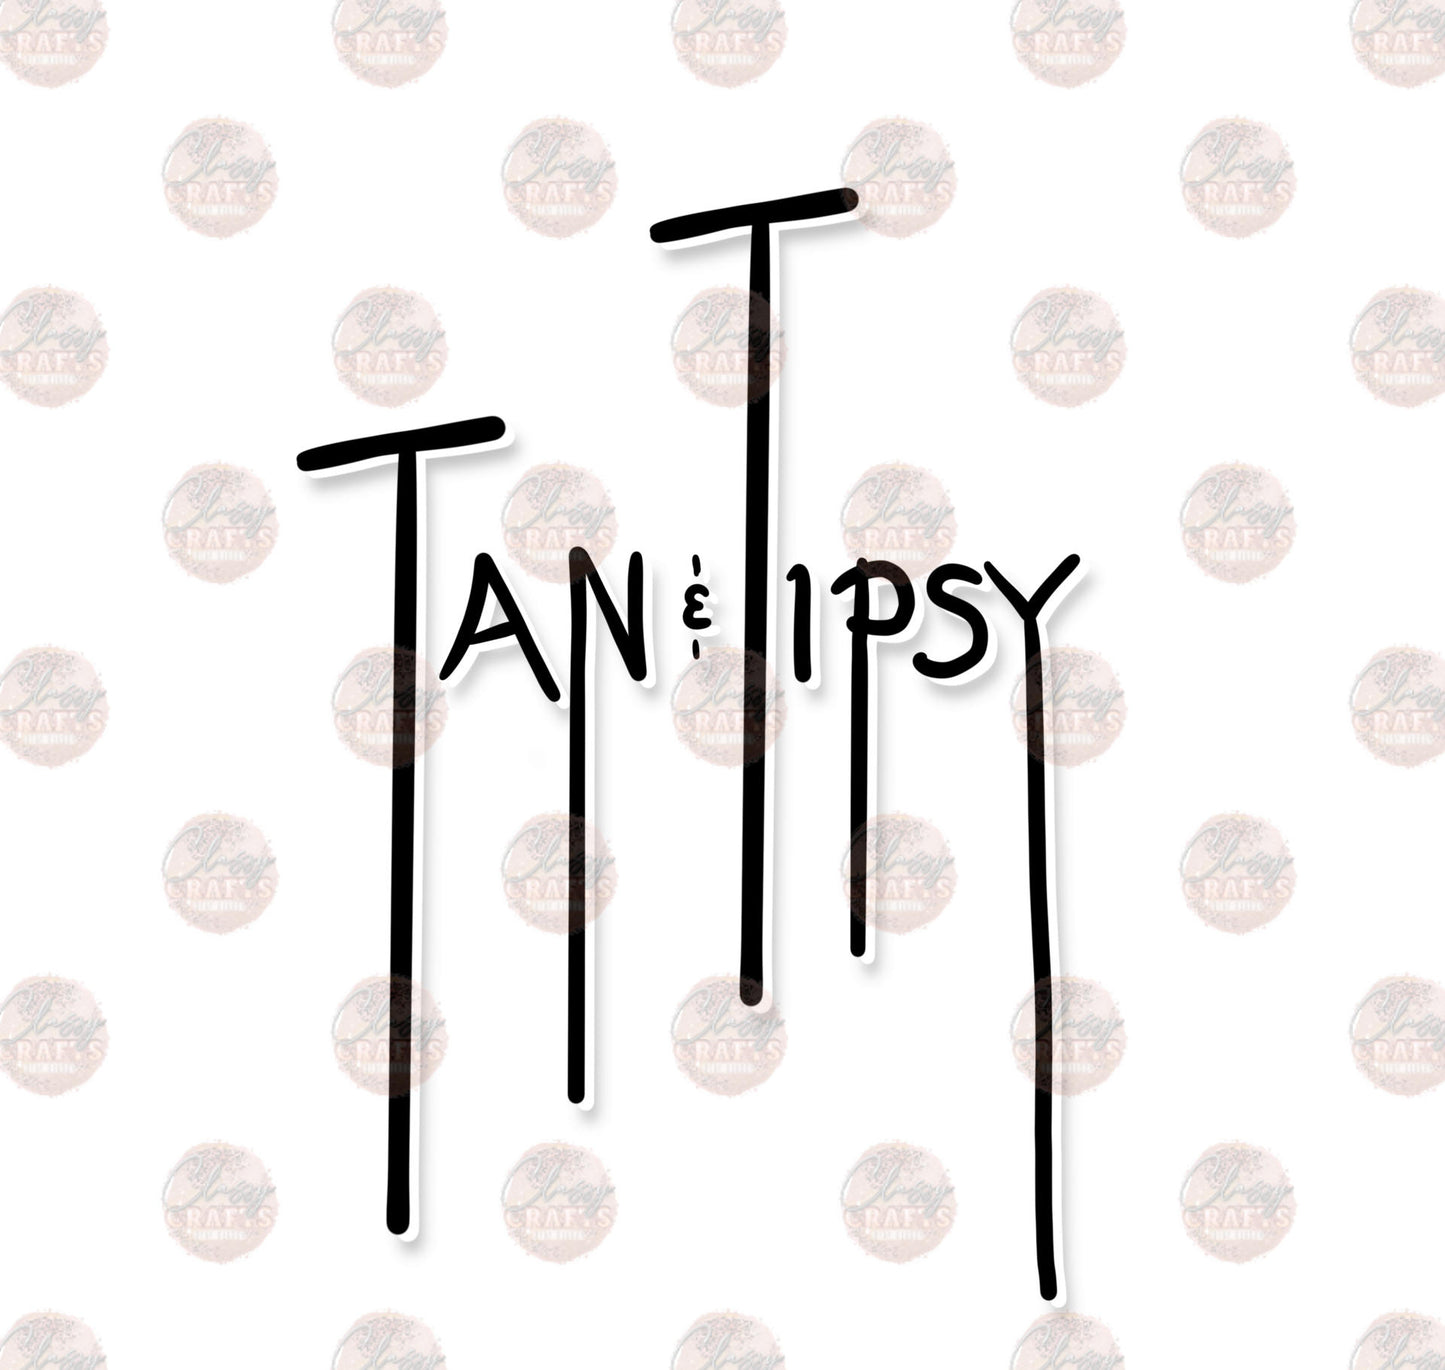 Tan & Tipsy 2 Outlined - Sublimation Transfer